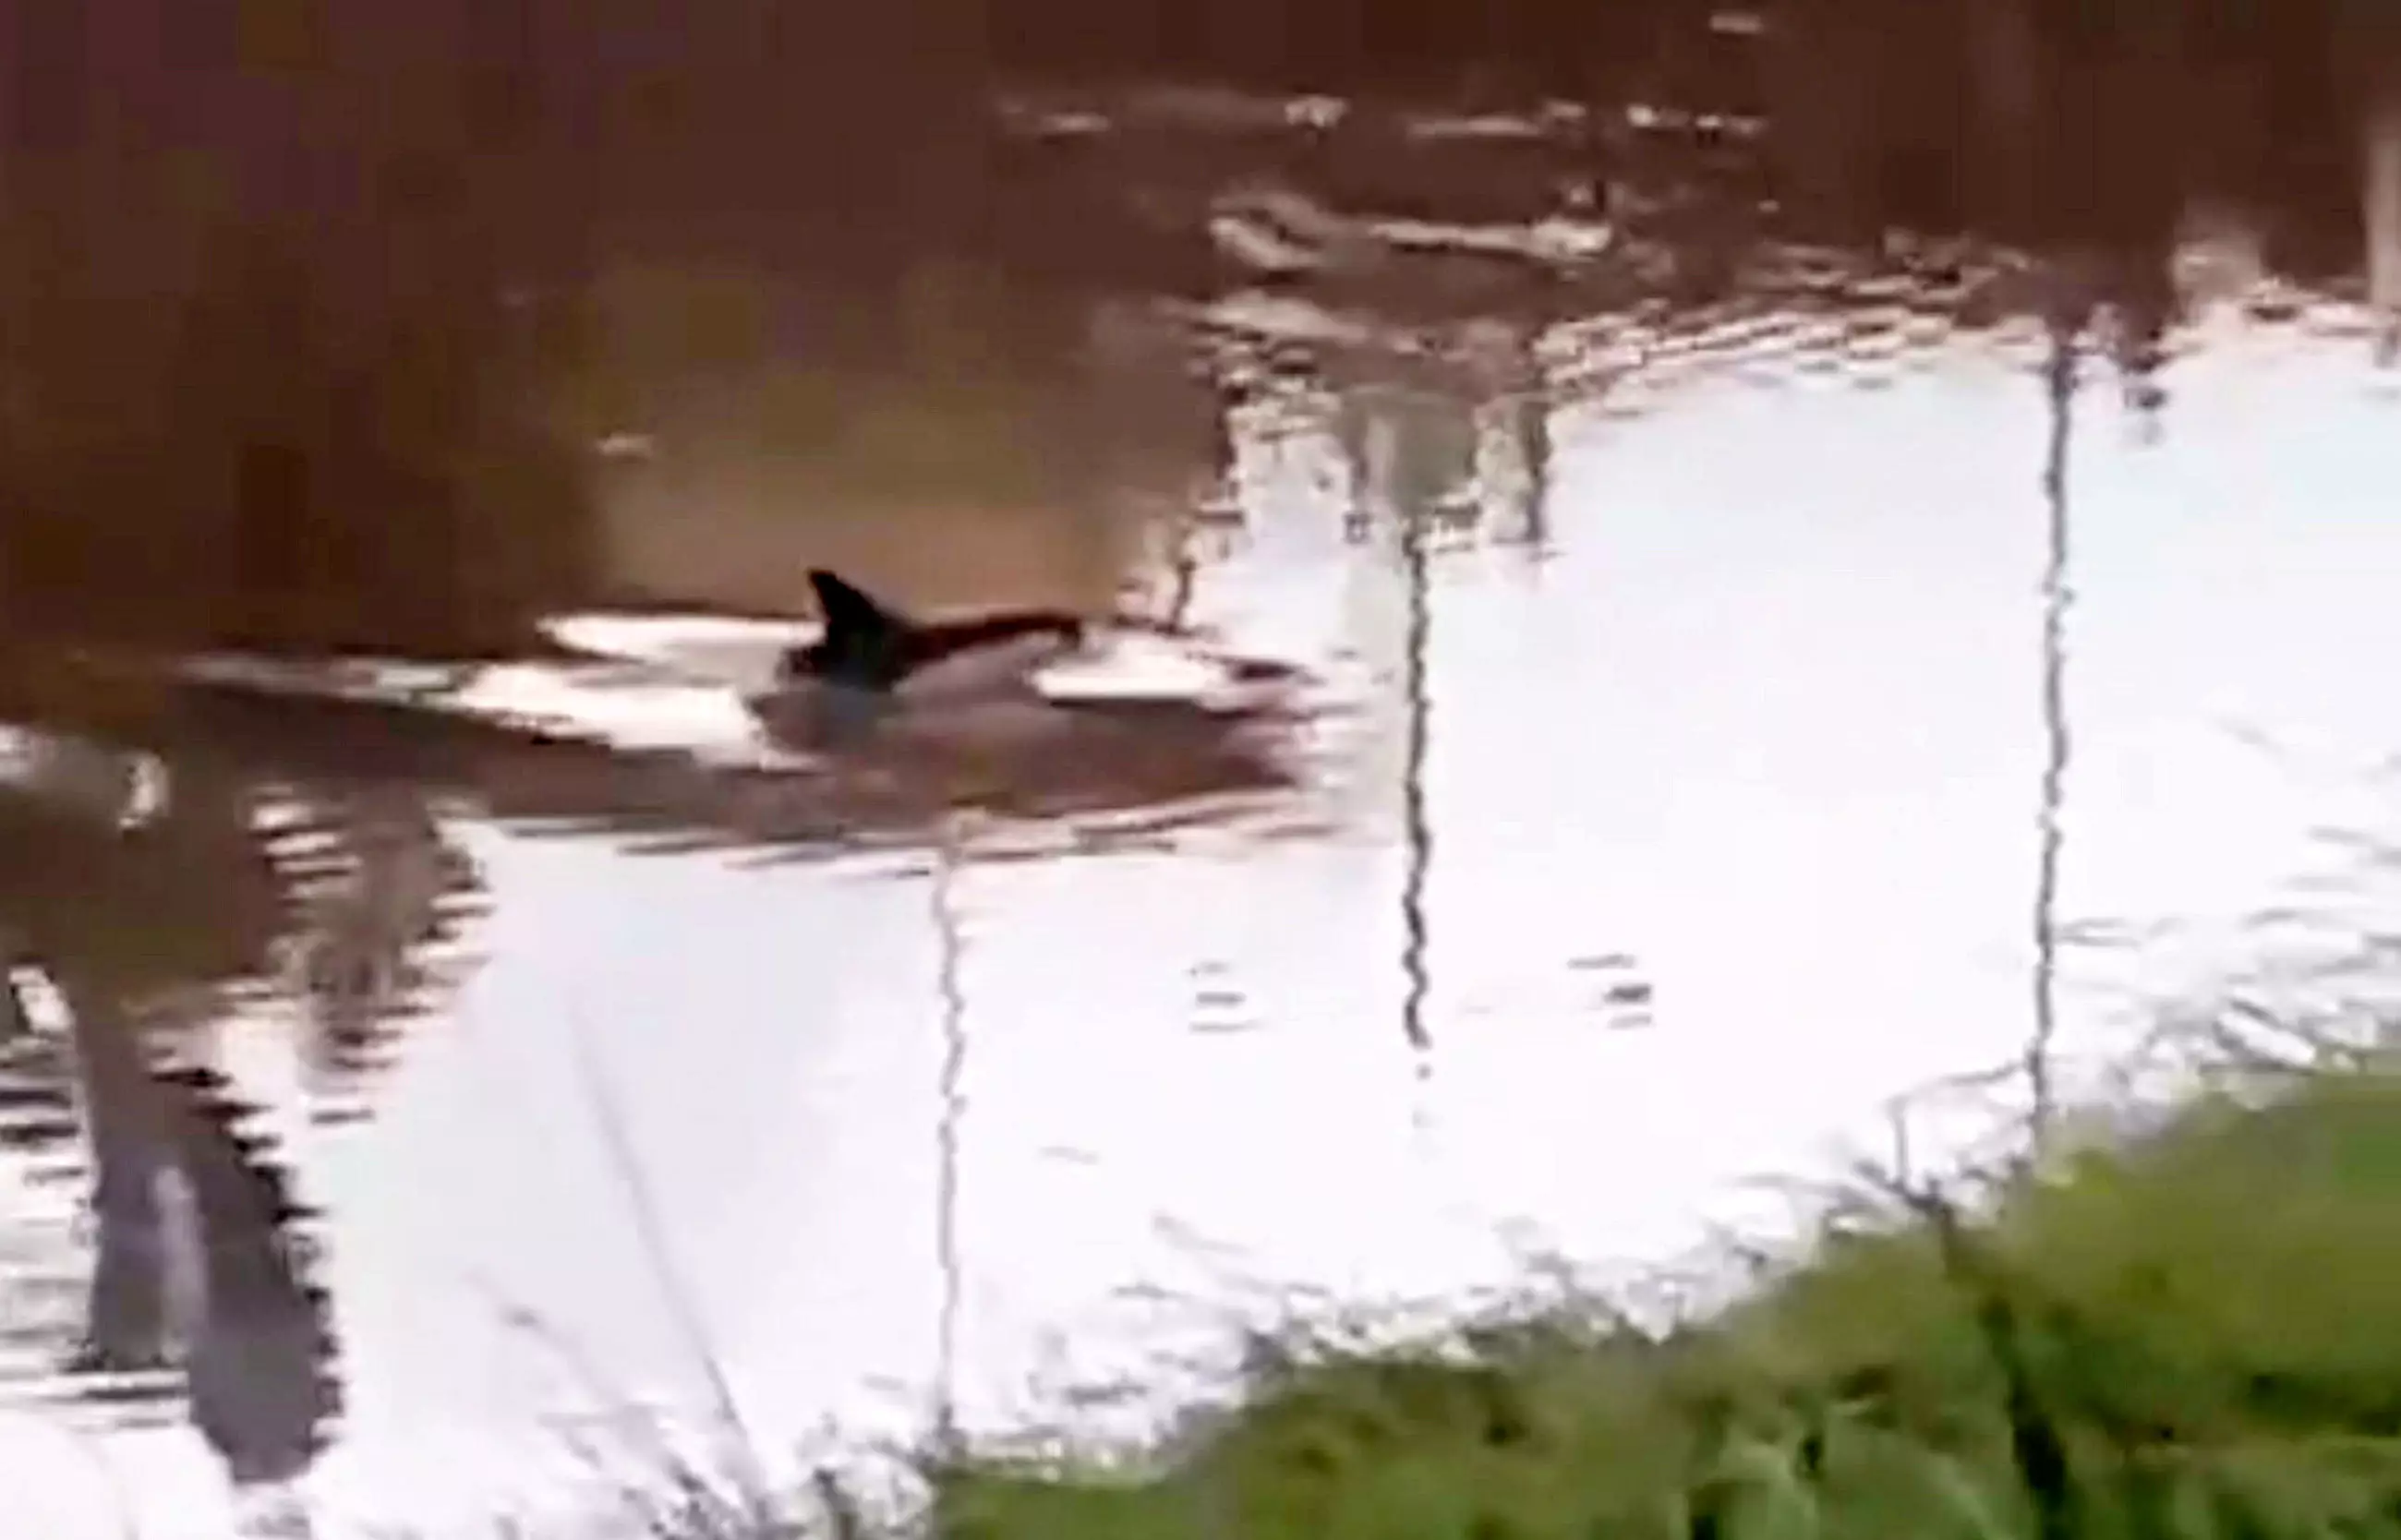 The dolphin was spotted in a river in Cambridgeshire.